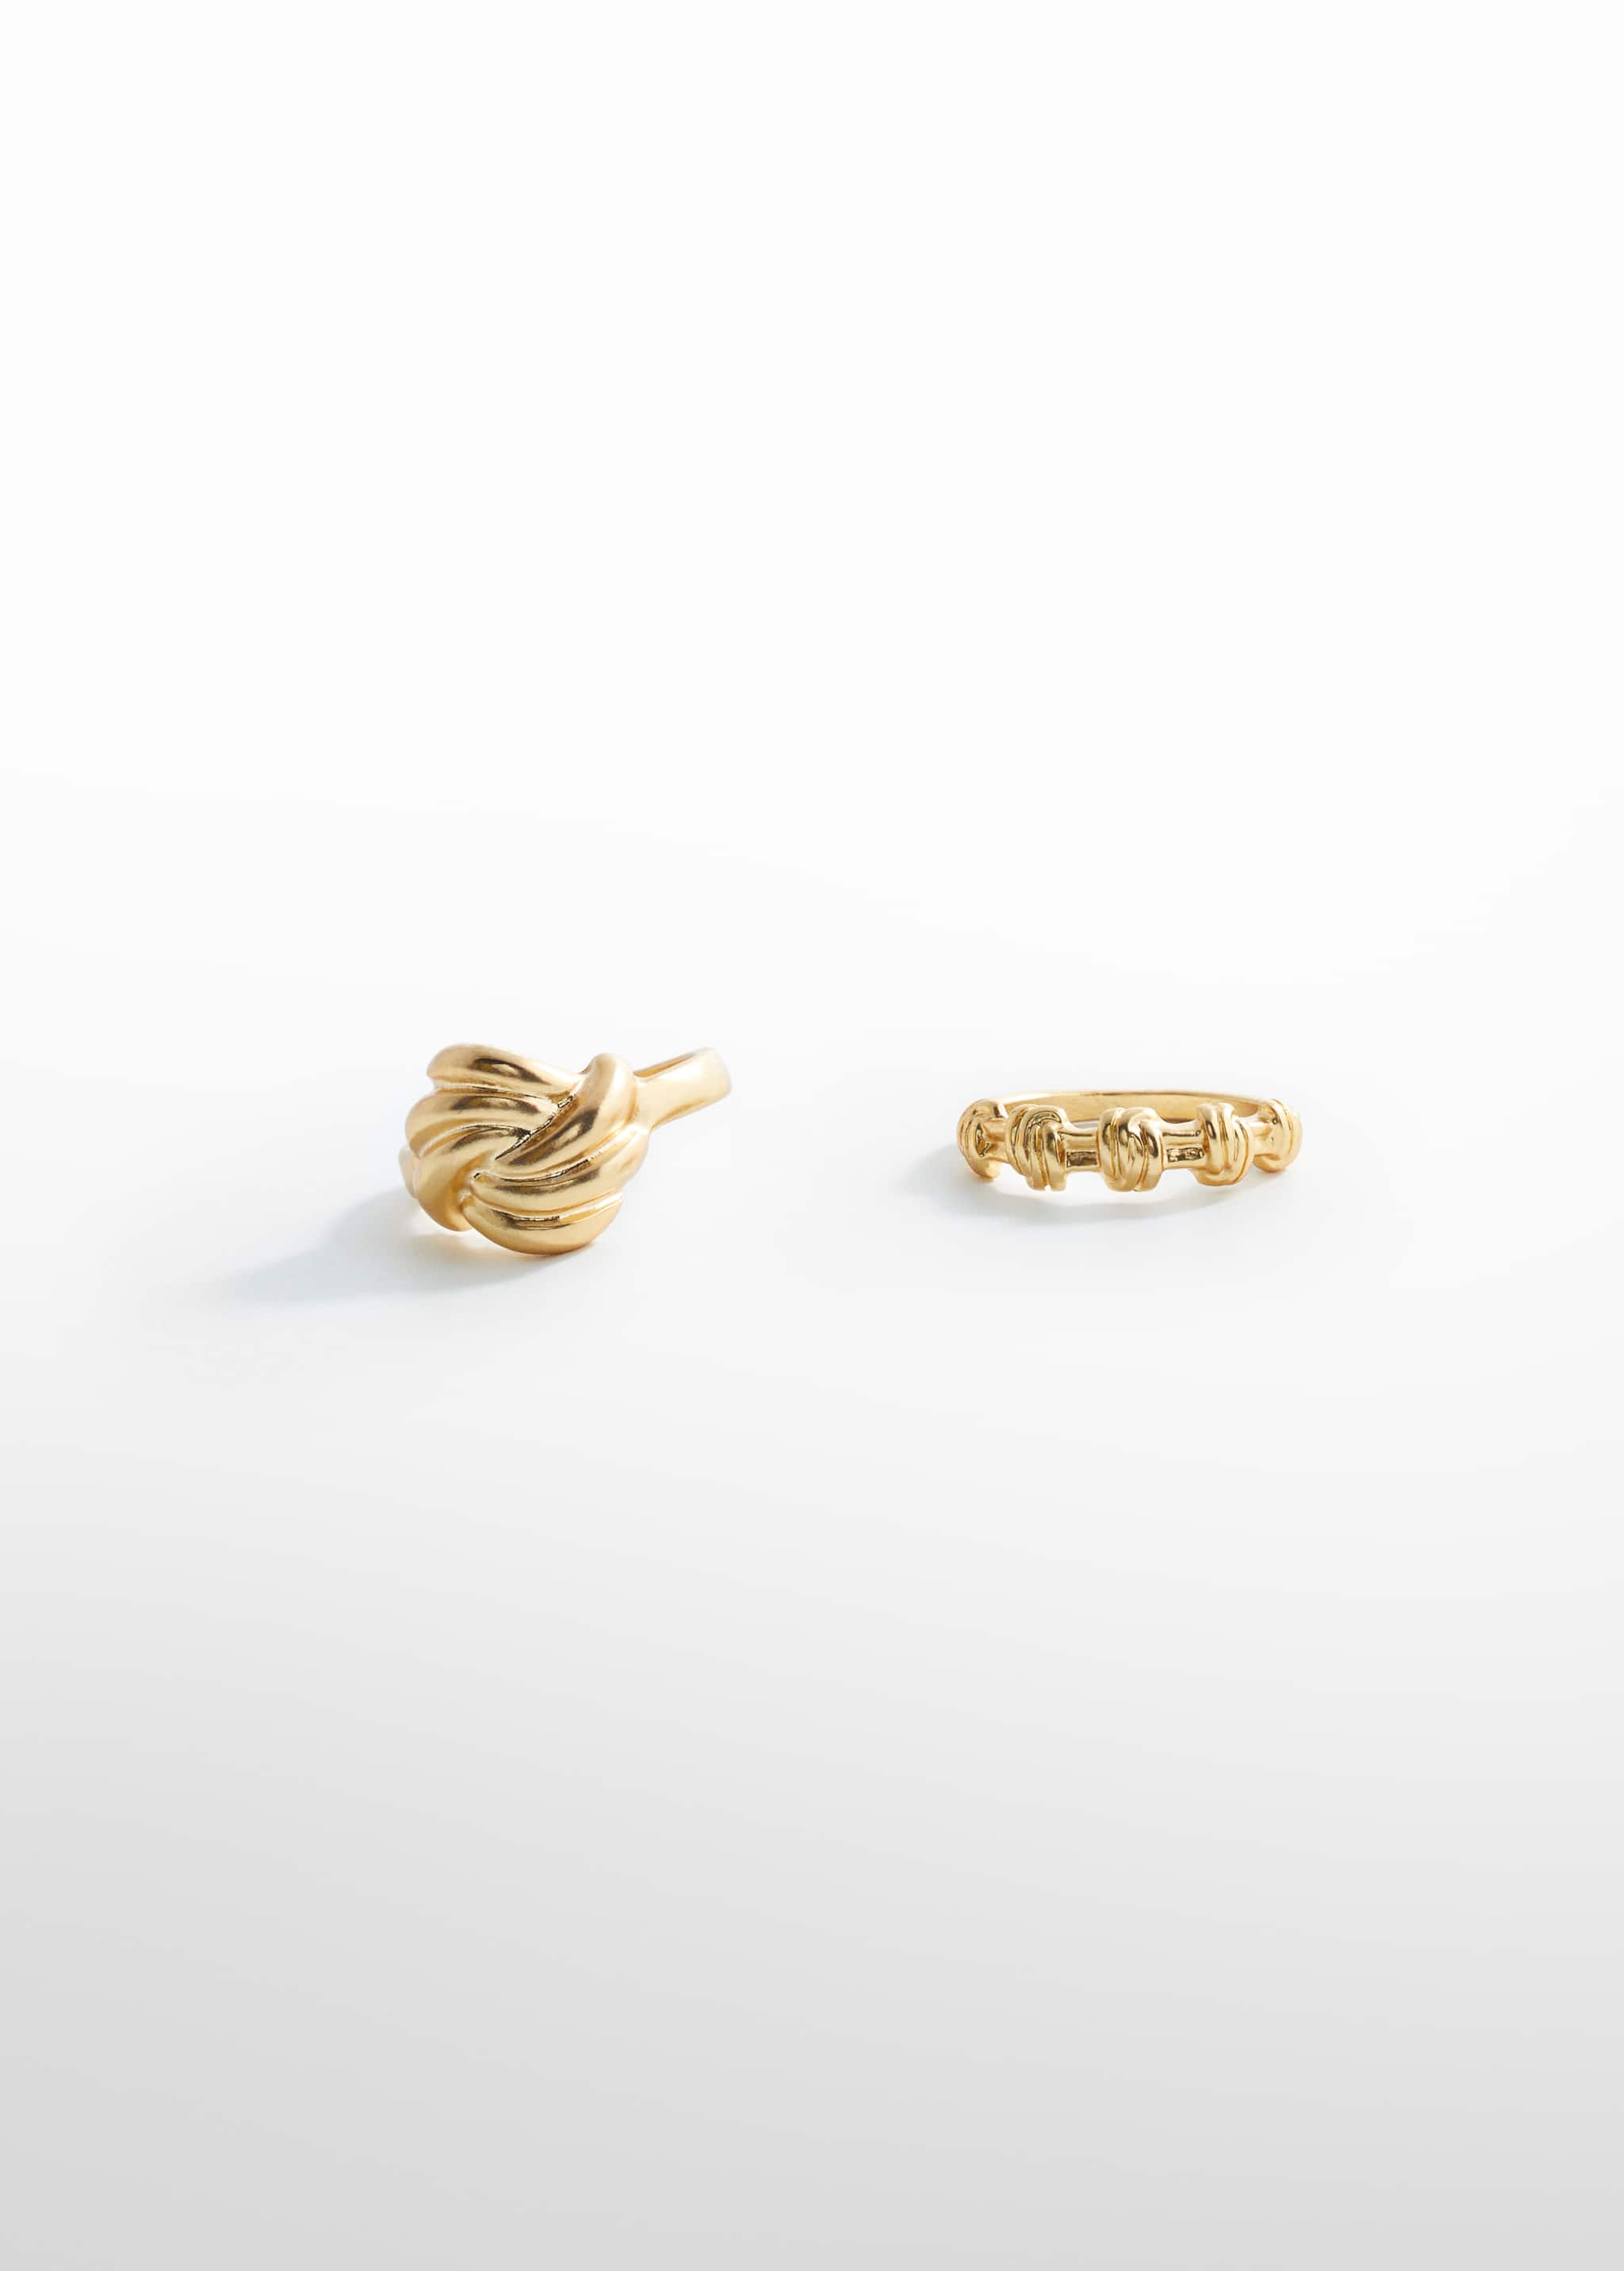 Set of interlocking rings  - Article without model